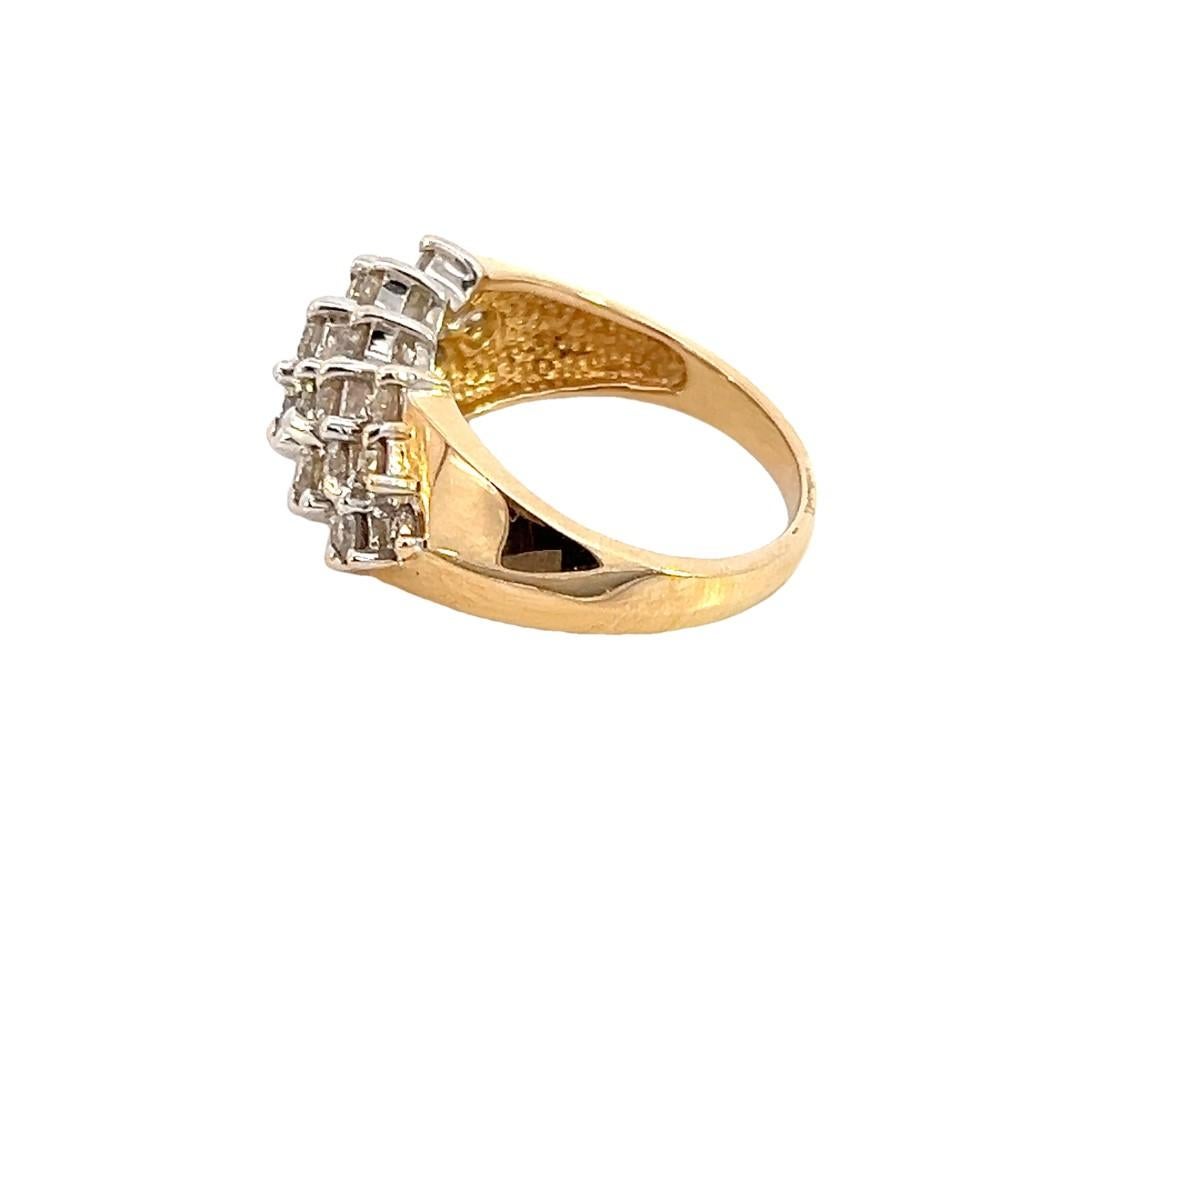 14K Yellow Gold Apx 1 1/2 CTW Round Diamond Fashion Ring sz 7 In Good Condition For Sale In South Bend, IN